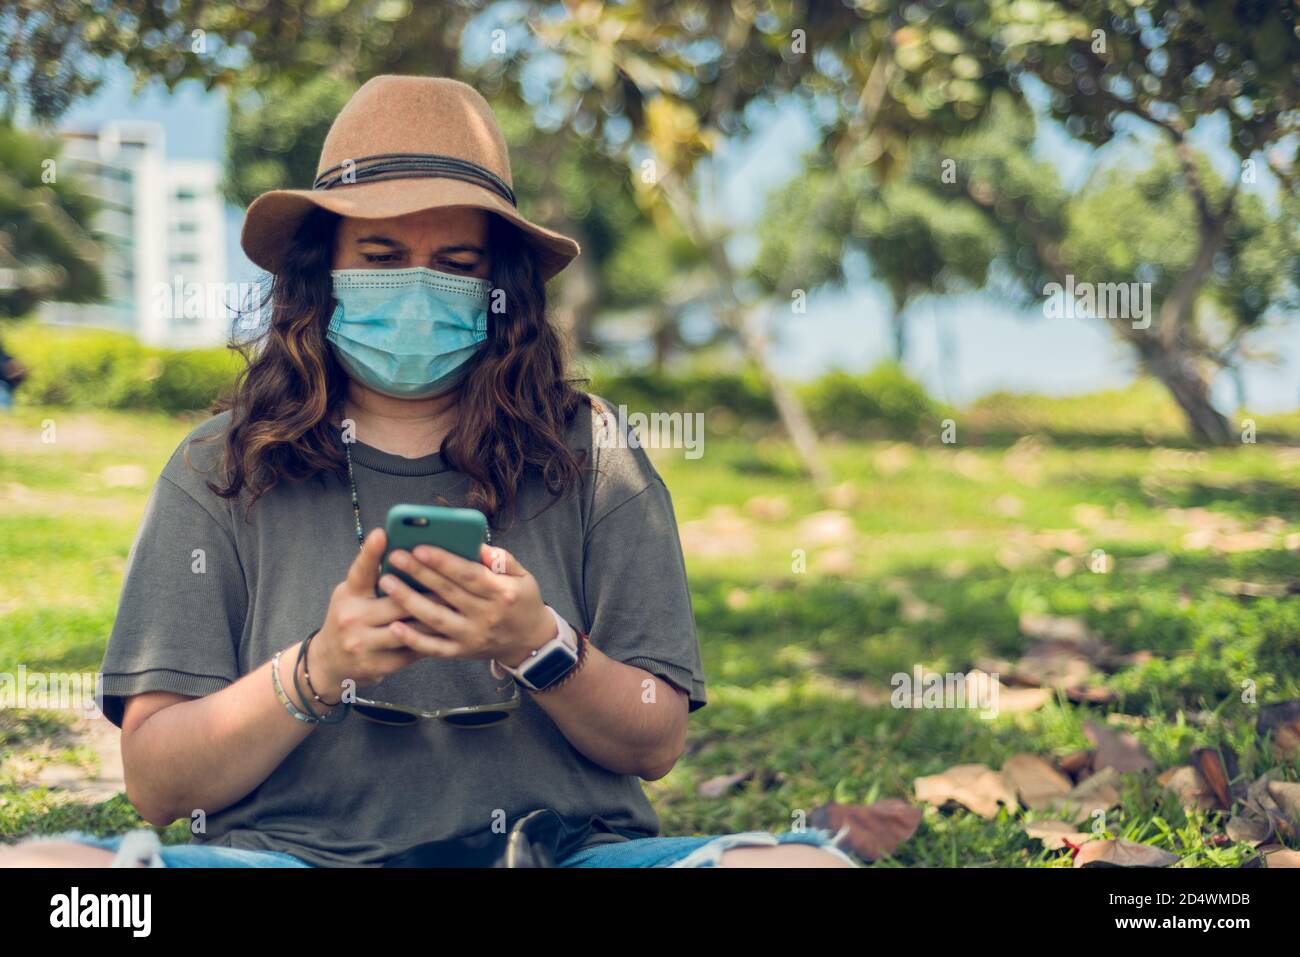 Portrait of a woman with a hat looking at her mobile that is protected with a medical mask and is outdoors. New normal. Copy space Stock Photo